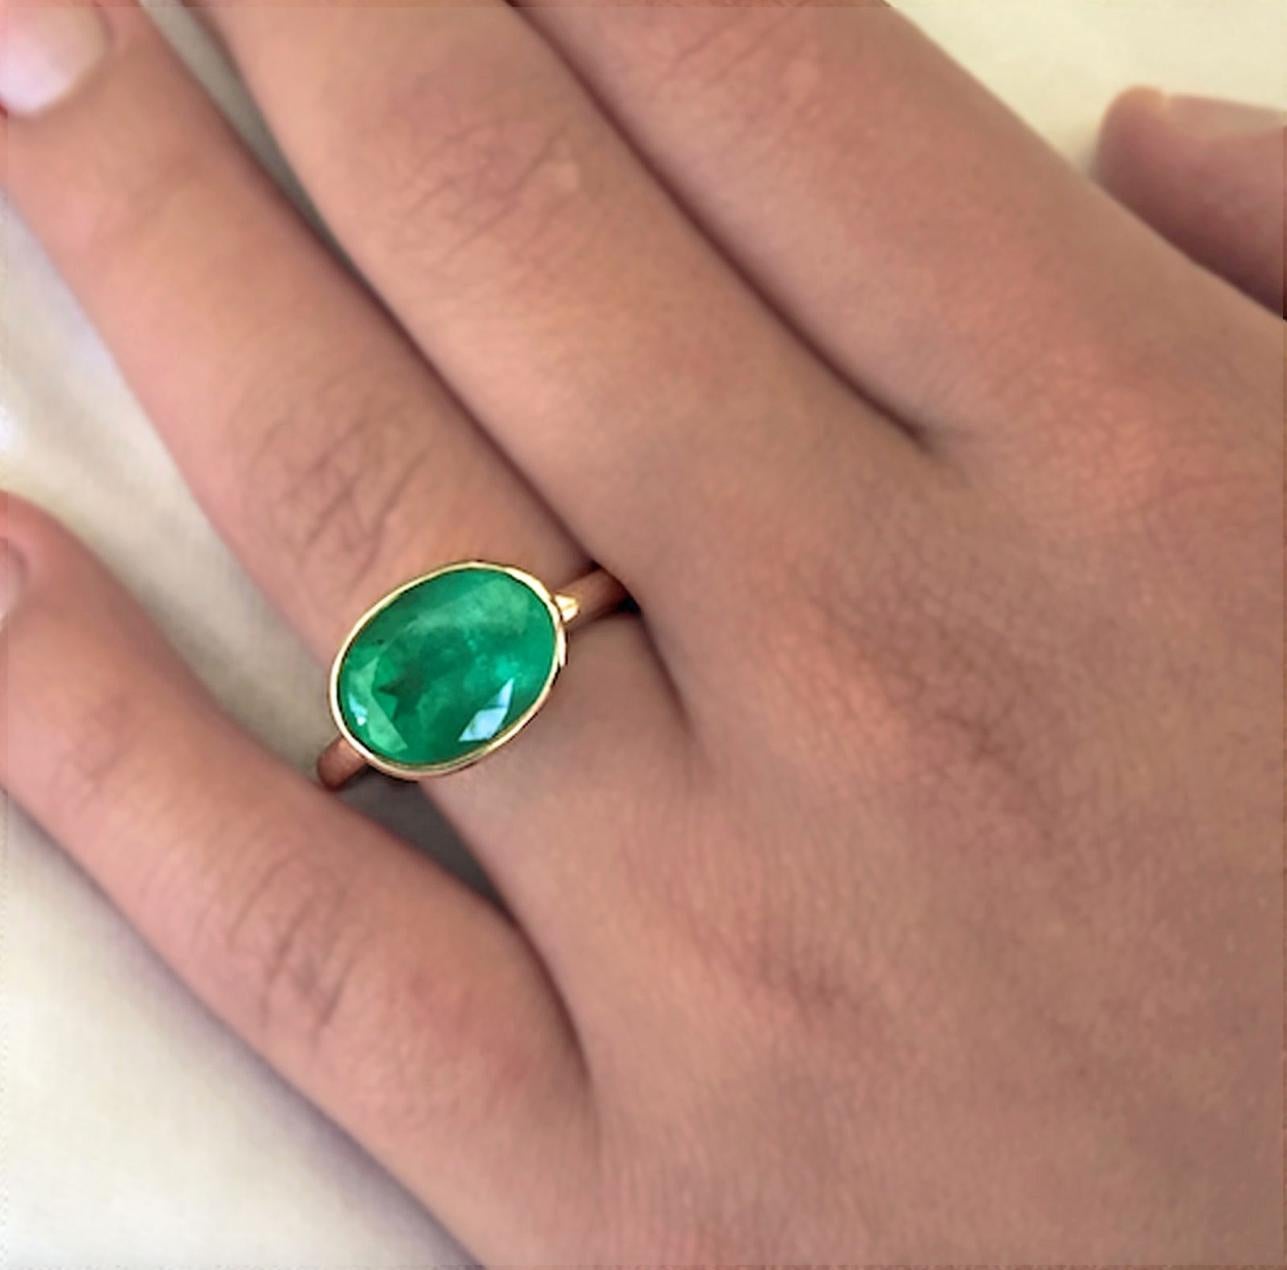 Rare Hammered Yellow Gold Emerald Engagement Ring Big 4.80 Carat Natural Colombian Emerald
Primary Stone: 100% Natural Colombian Emerald
Shape or Cut: Oval Cut 
Approx Emerald Weight: 4.80 Carats (1 emerald)
Approx Emerald Measurements: 13.00mm x